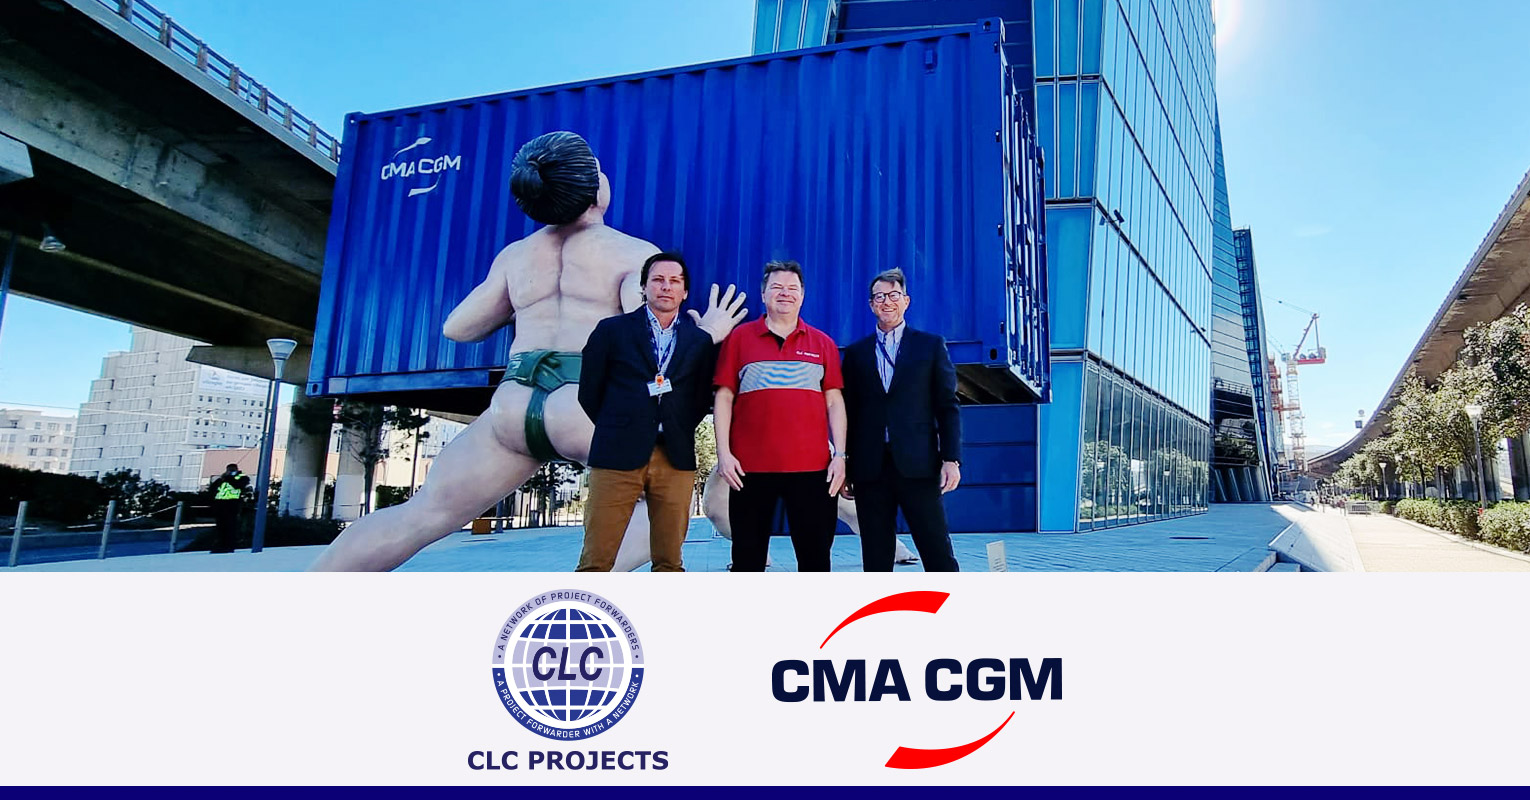 CLC Projects met with Luc Lagarde and William Stalin of CMA CGM at their head office in Marseille, France